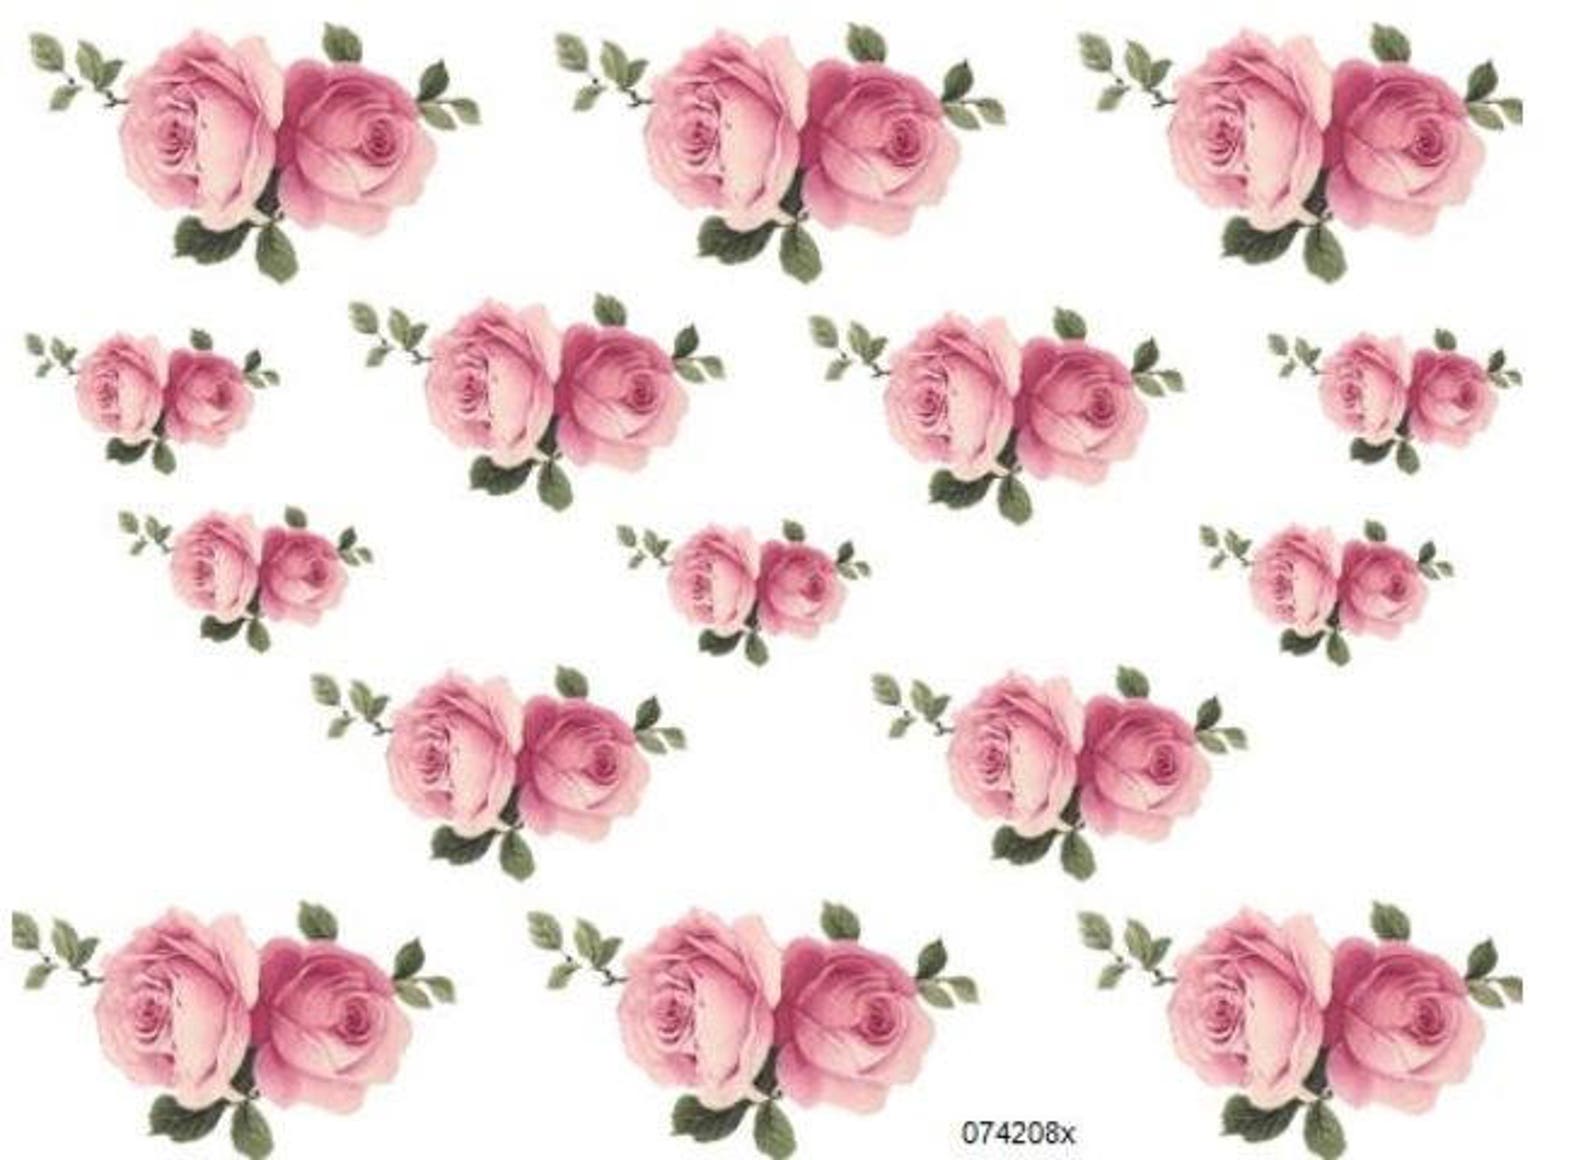 Vintage Fluffy Soft Pink Shabby Roses Decals - Etsy